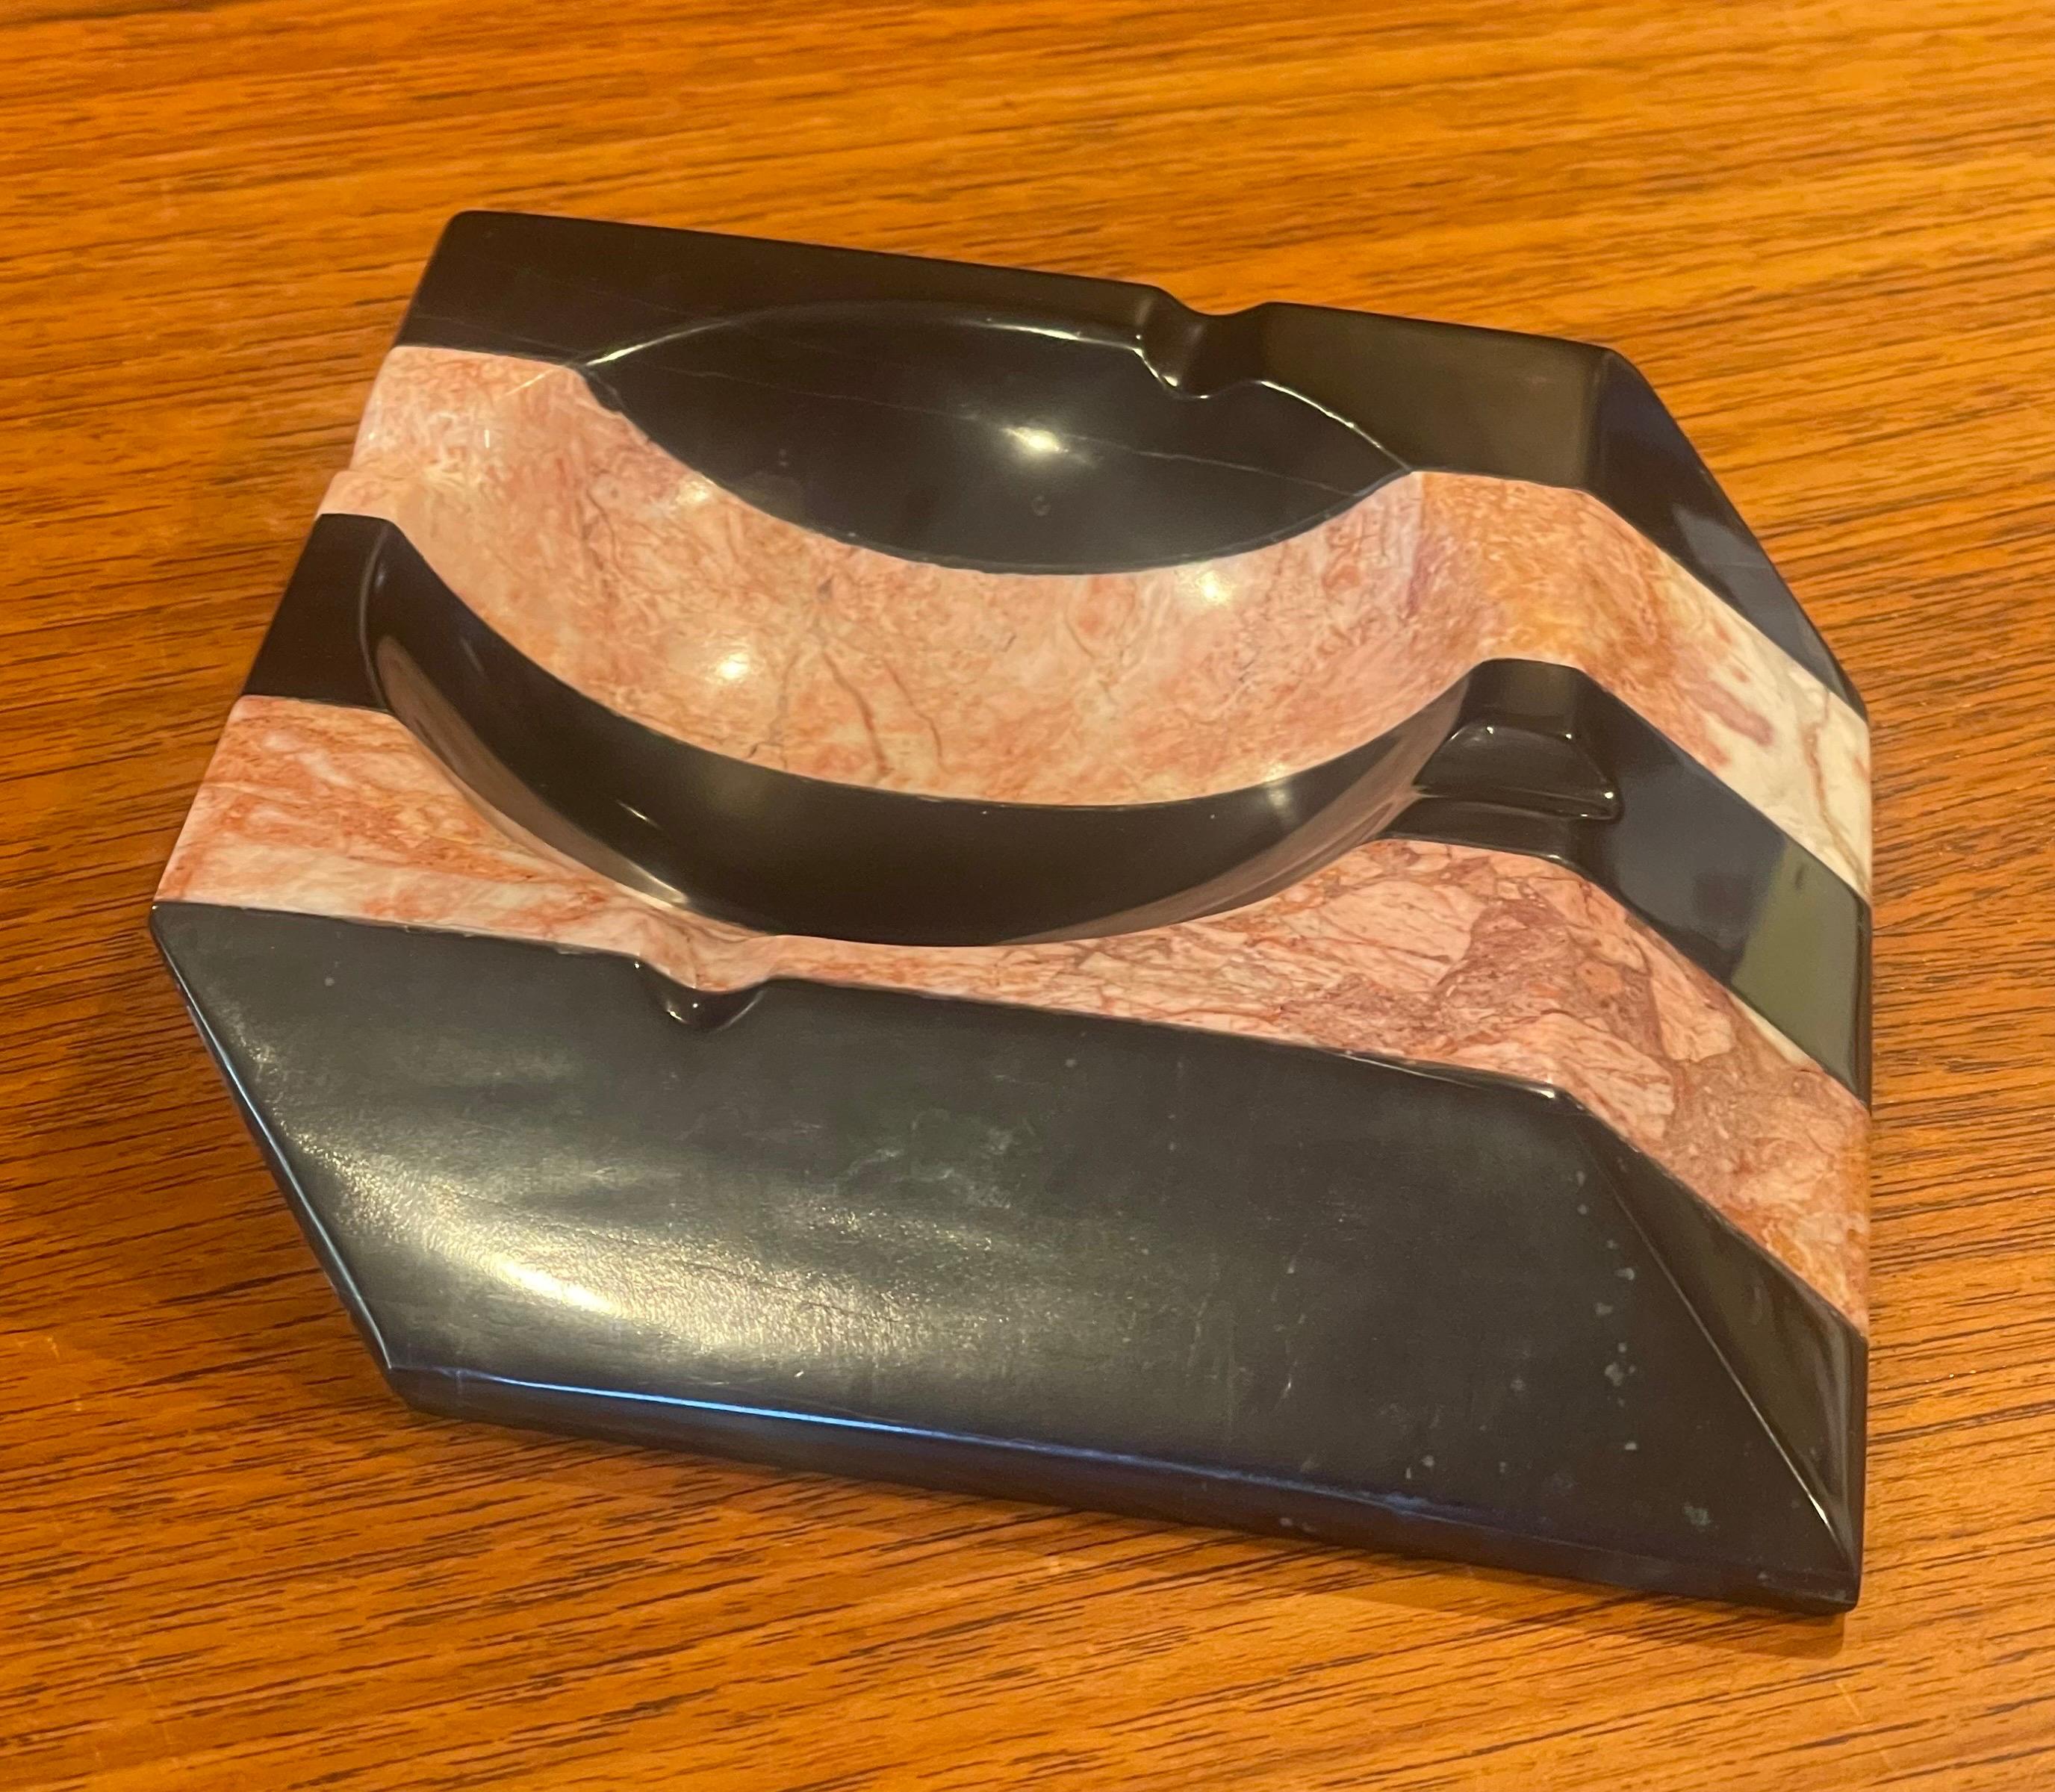 Art Deco striped marble ashtray circa 1940s. The piece is in very good vintage condition and has a wonderful original patina; it measures 5.75